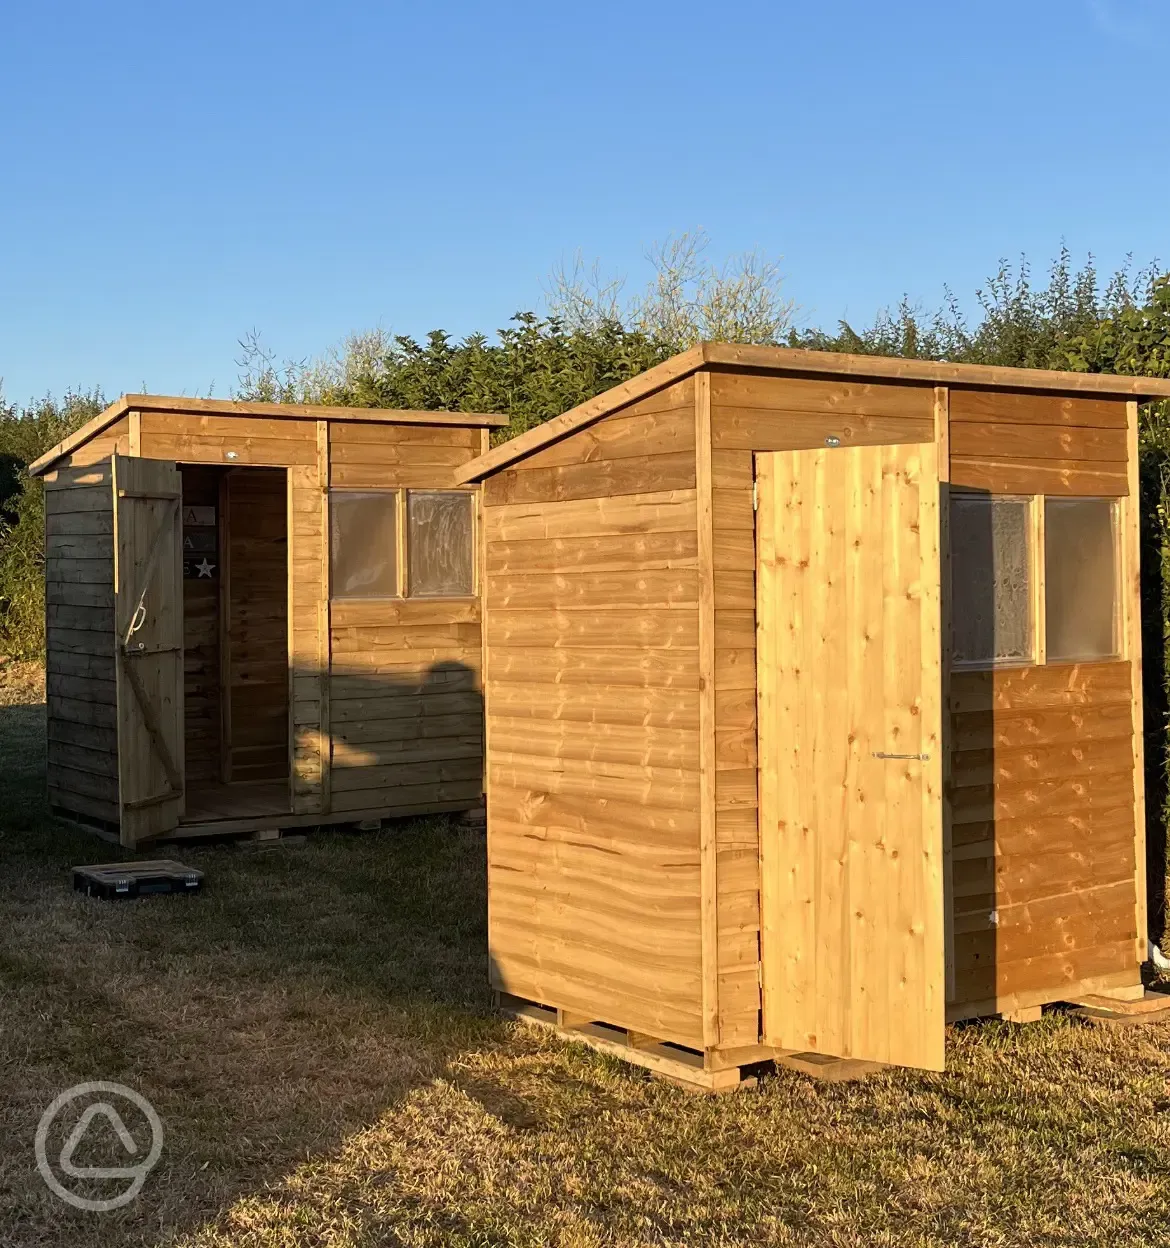 New compost toilets 